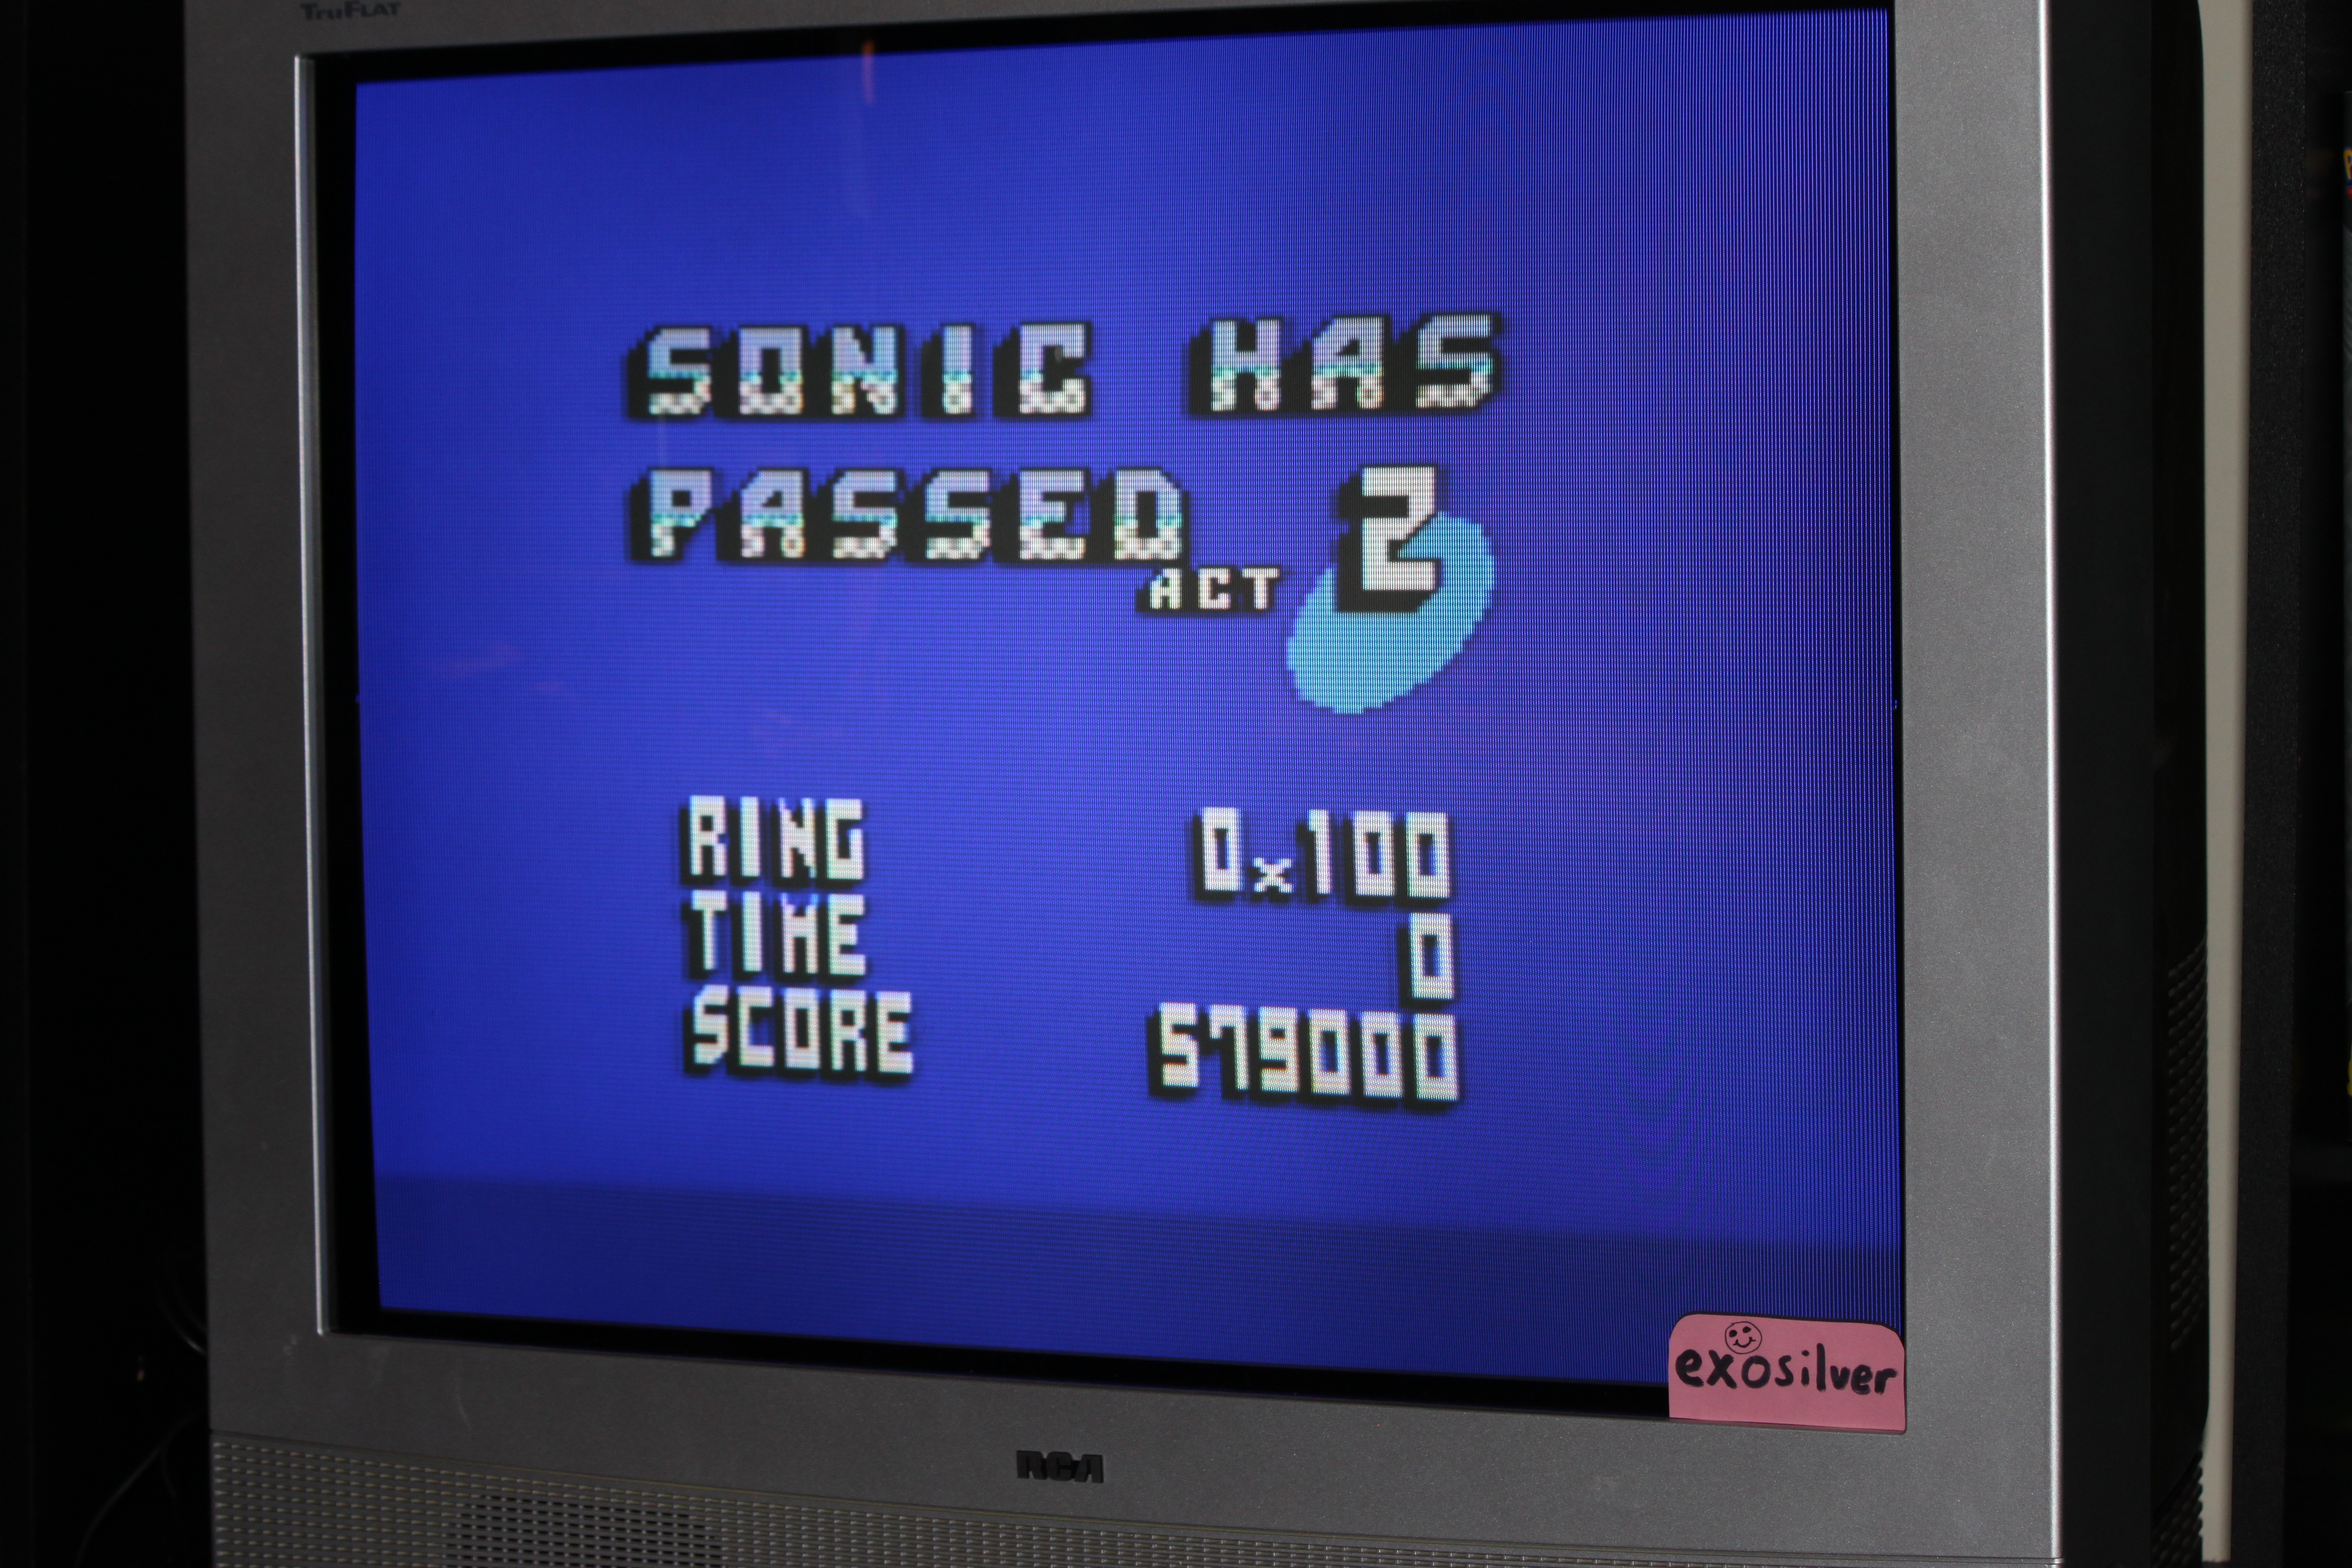 Sonic The Hedgehog 2 579,000 points